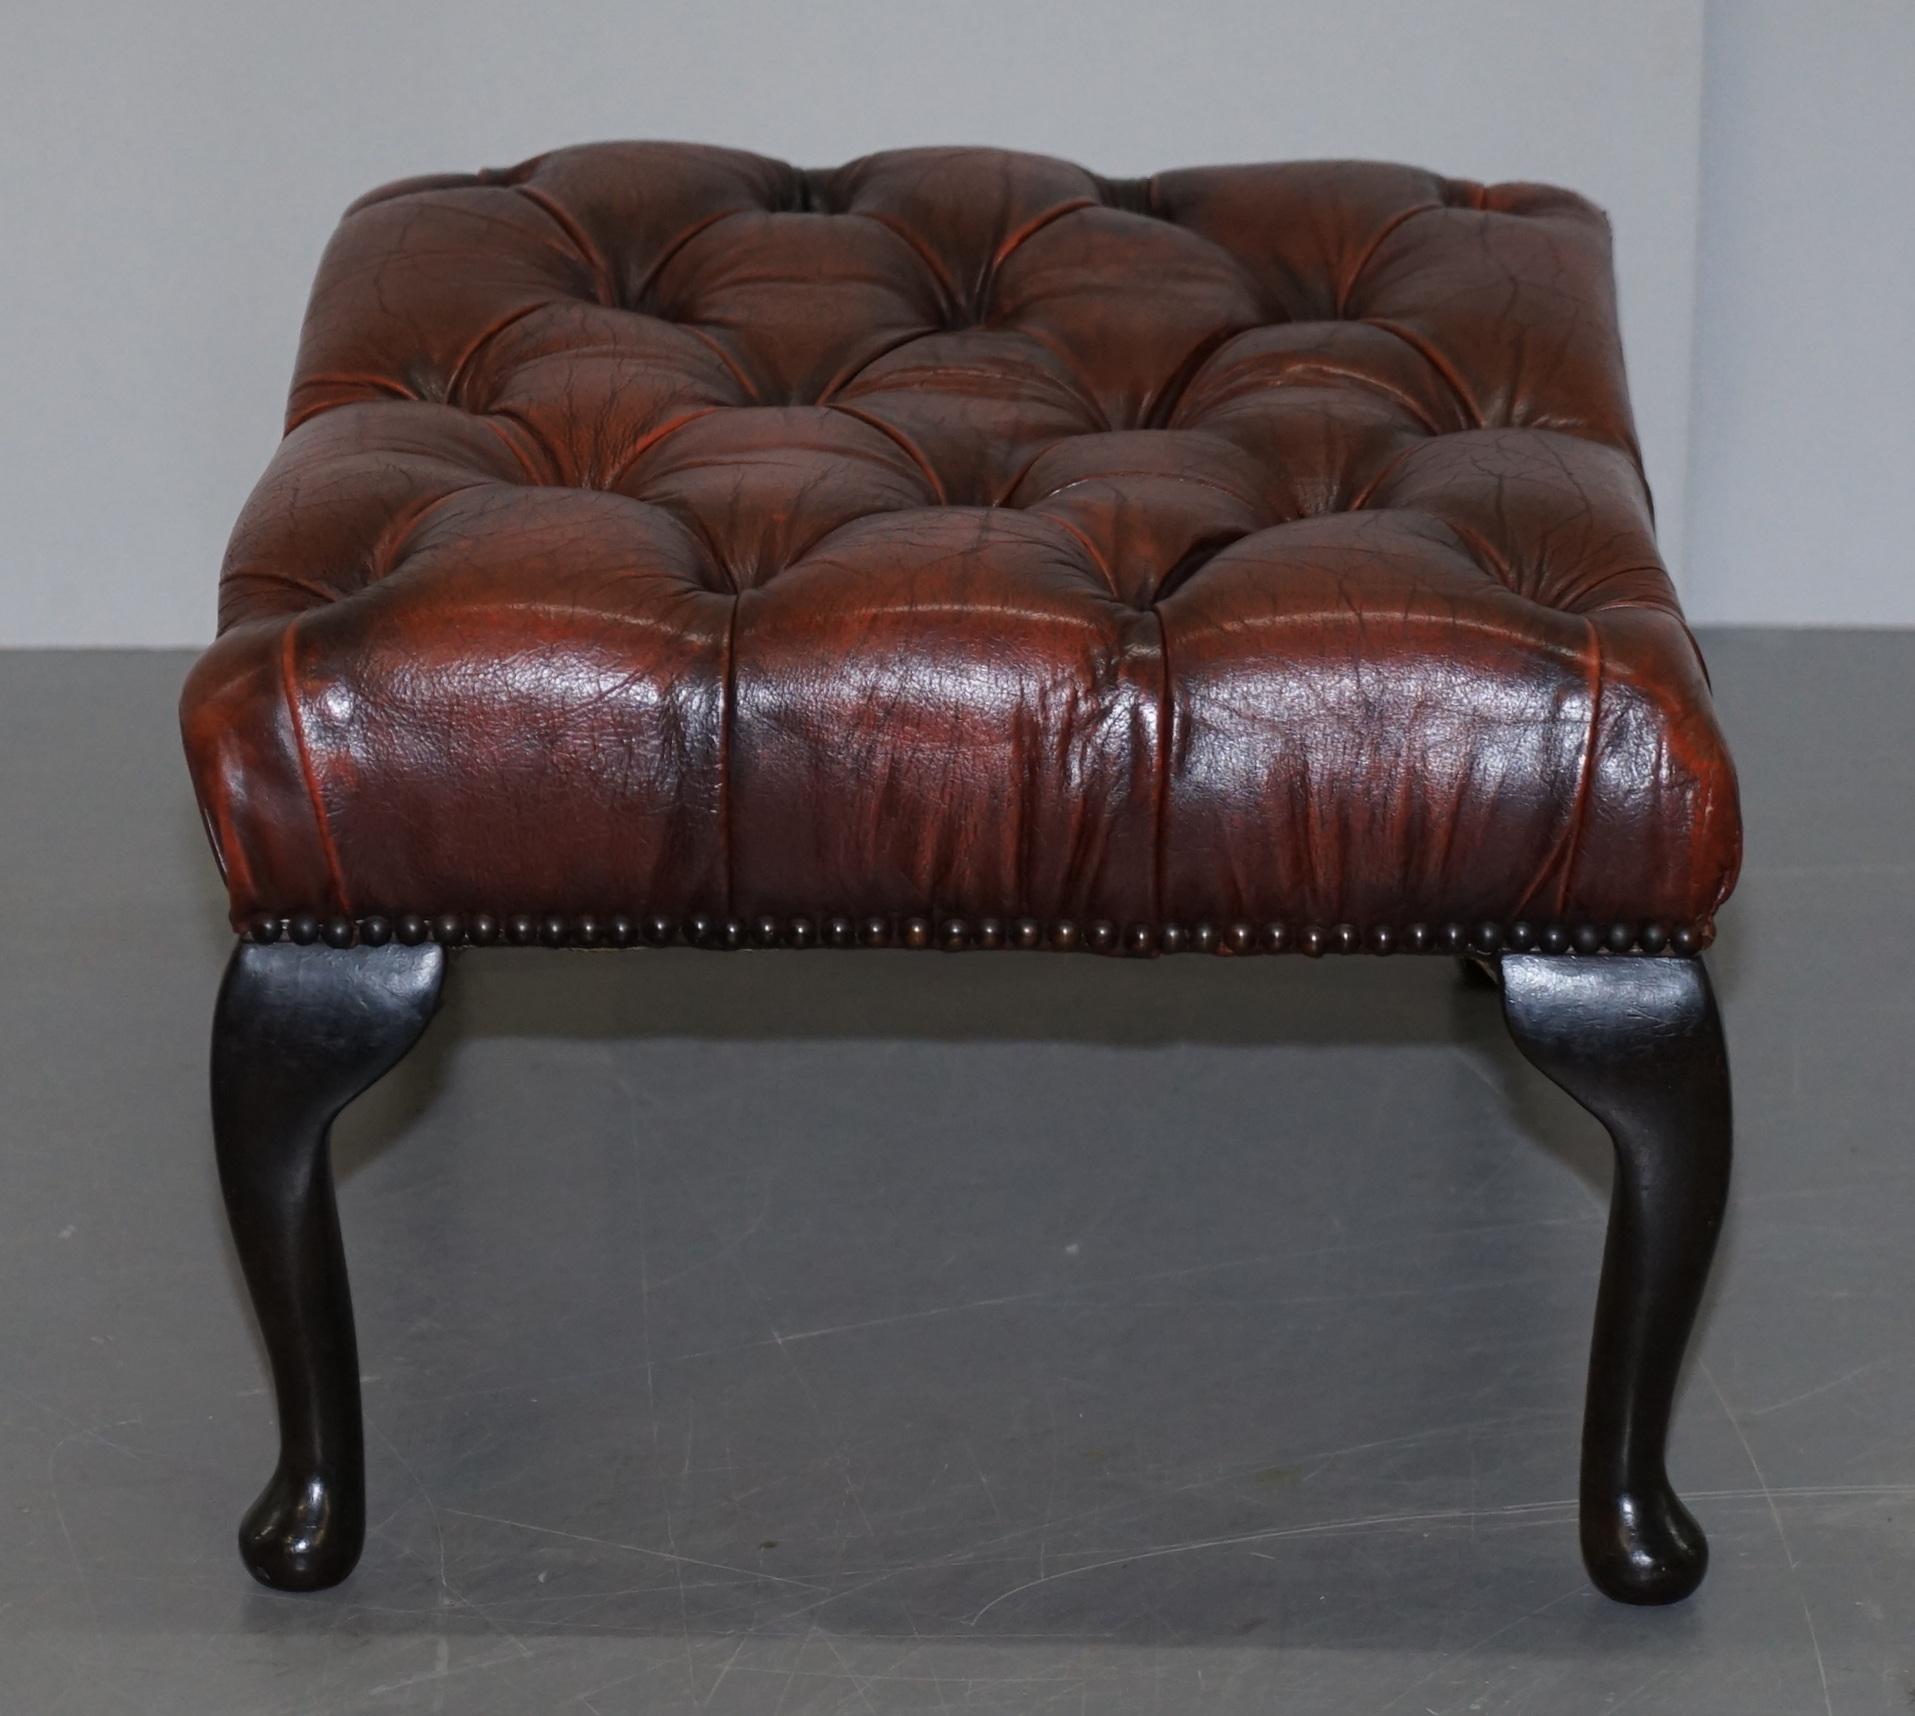 Hand-Crafted Lovely Vintage Brown Leather Large Chesterfield Tufted Two Person Footstool